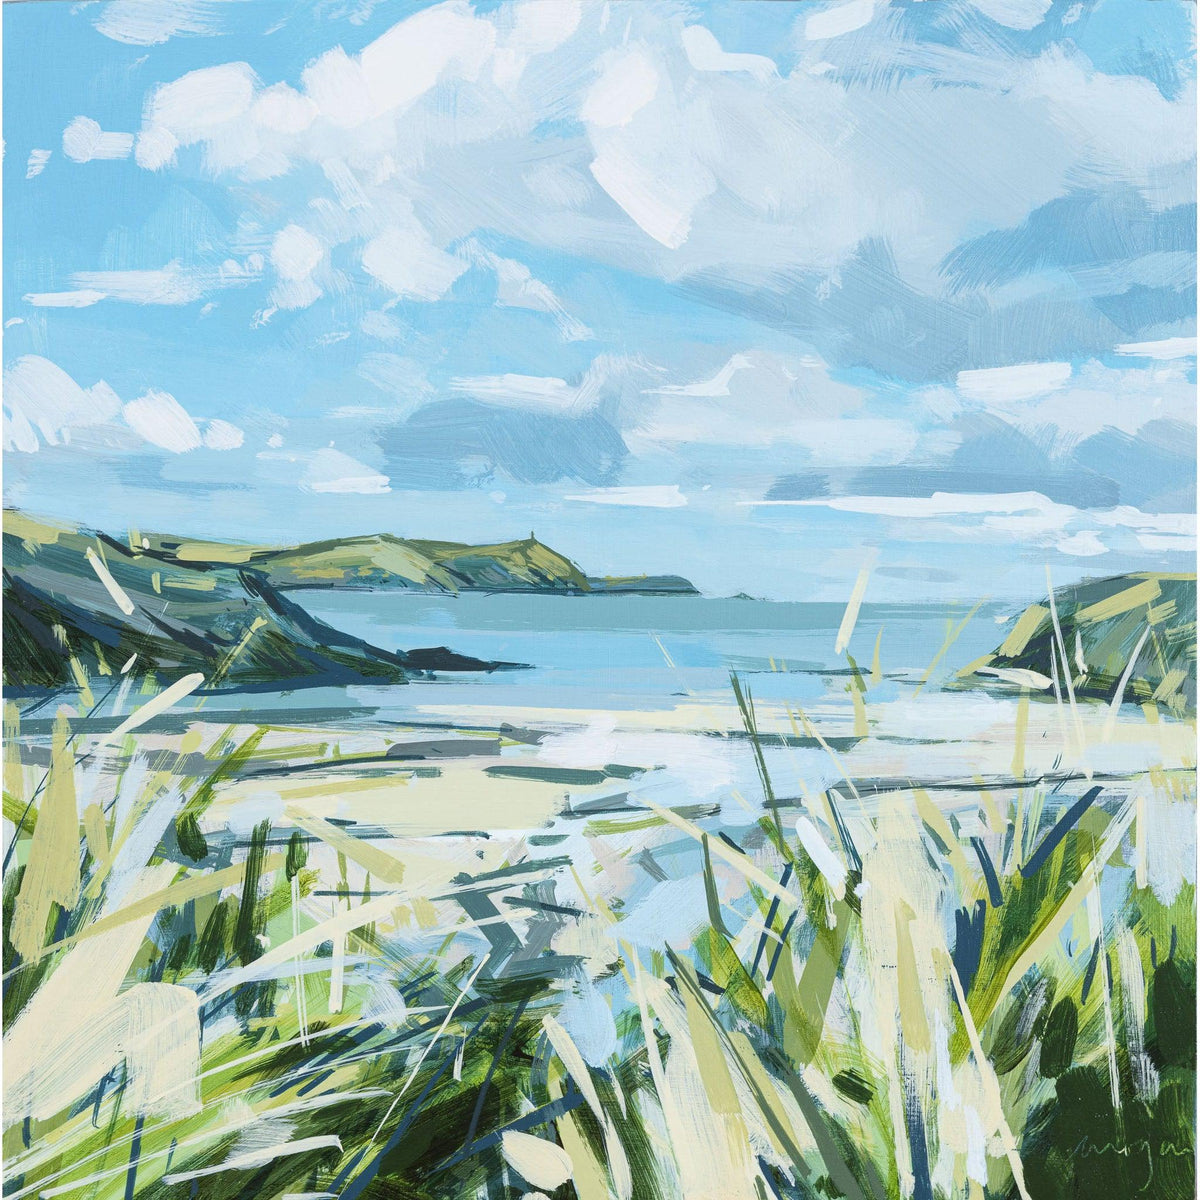 ‘Baby’s Bay’ acrylic on wood block by Imogen Bone. Available at Padstow Gallery, Cornwall